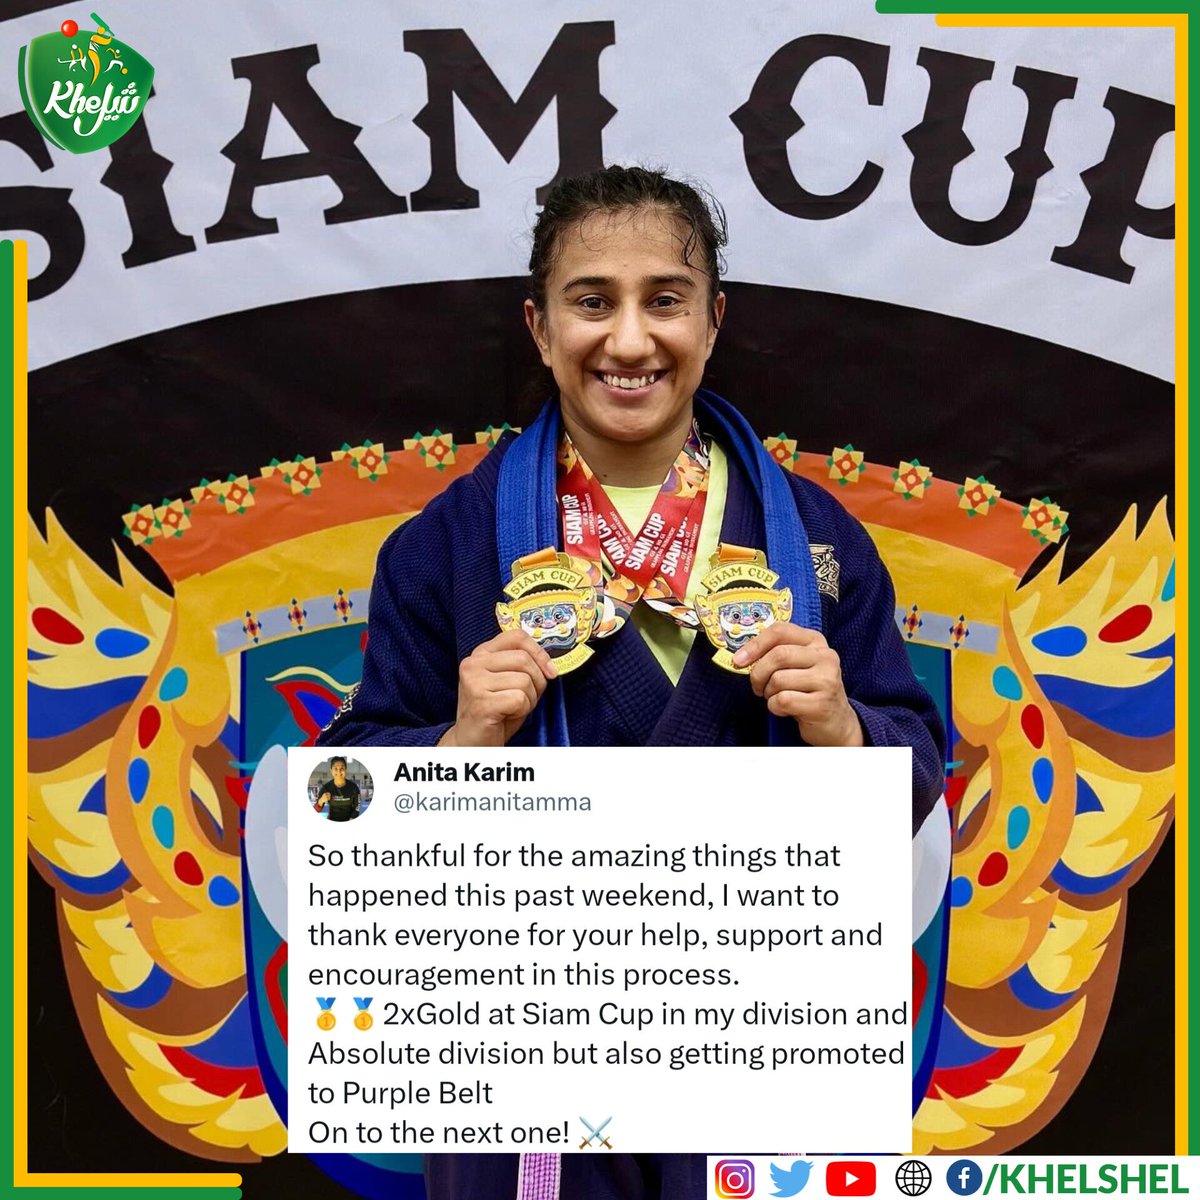 Congratulations to Pakistan's first female MMA fighter @karimanitamma on winning 2 gold medals at Siam Cup and being promoted to Purple Belt 👏 #MMAFighter | #Pakistan | #AnitaKarim | #SiamCup | #Karachi | #PurpleBelt | #MixedMartialArts